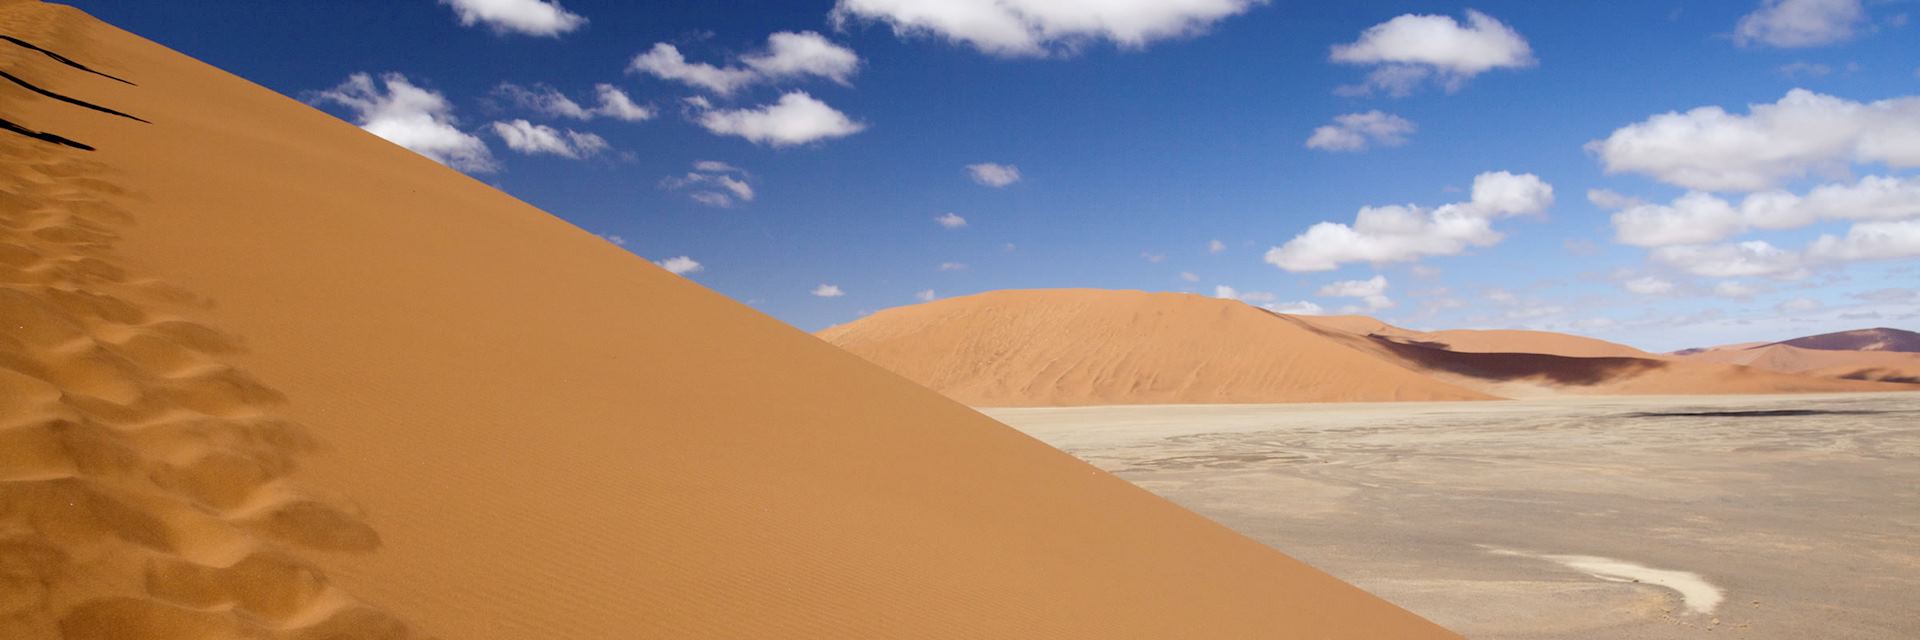 The dunes at Sossusvlei in Namibia